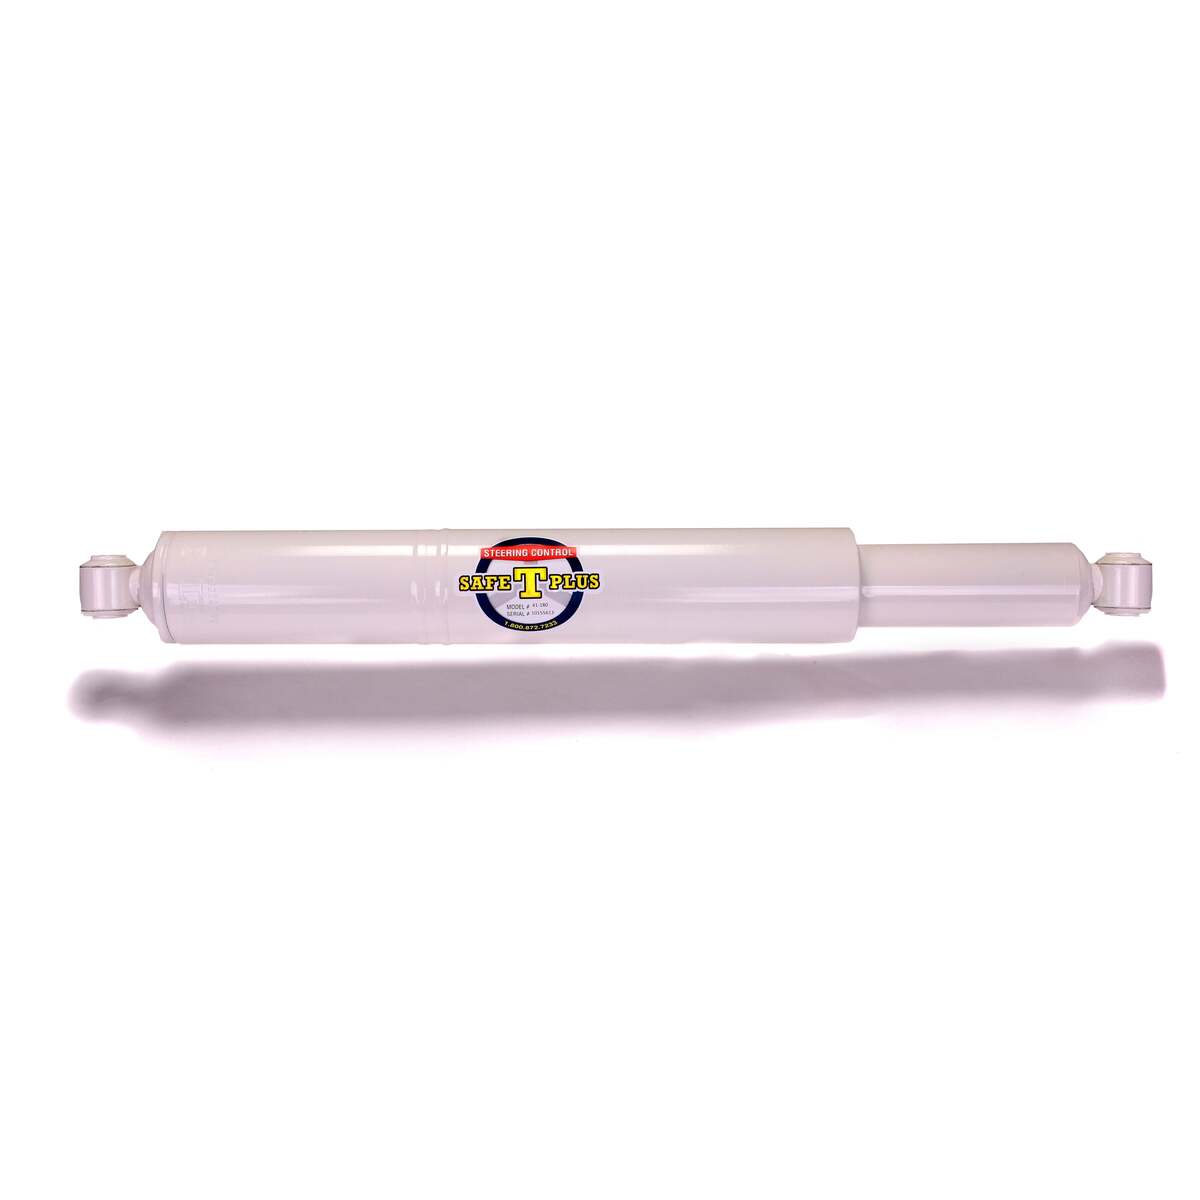 Safe T Plus 41-180 White Steering Stabilzer and Control